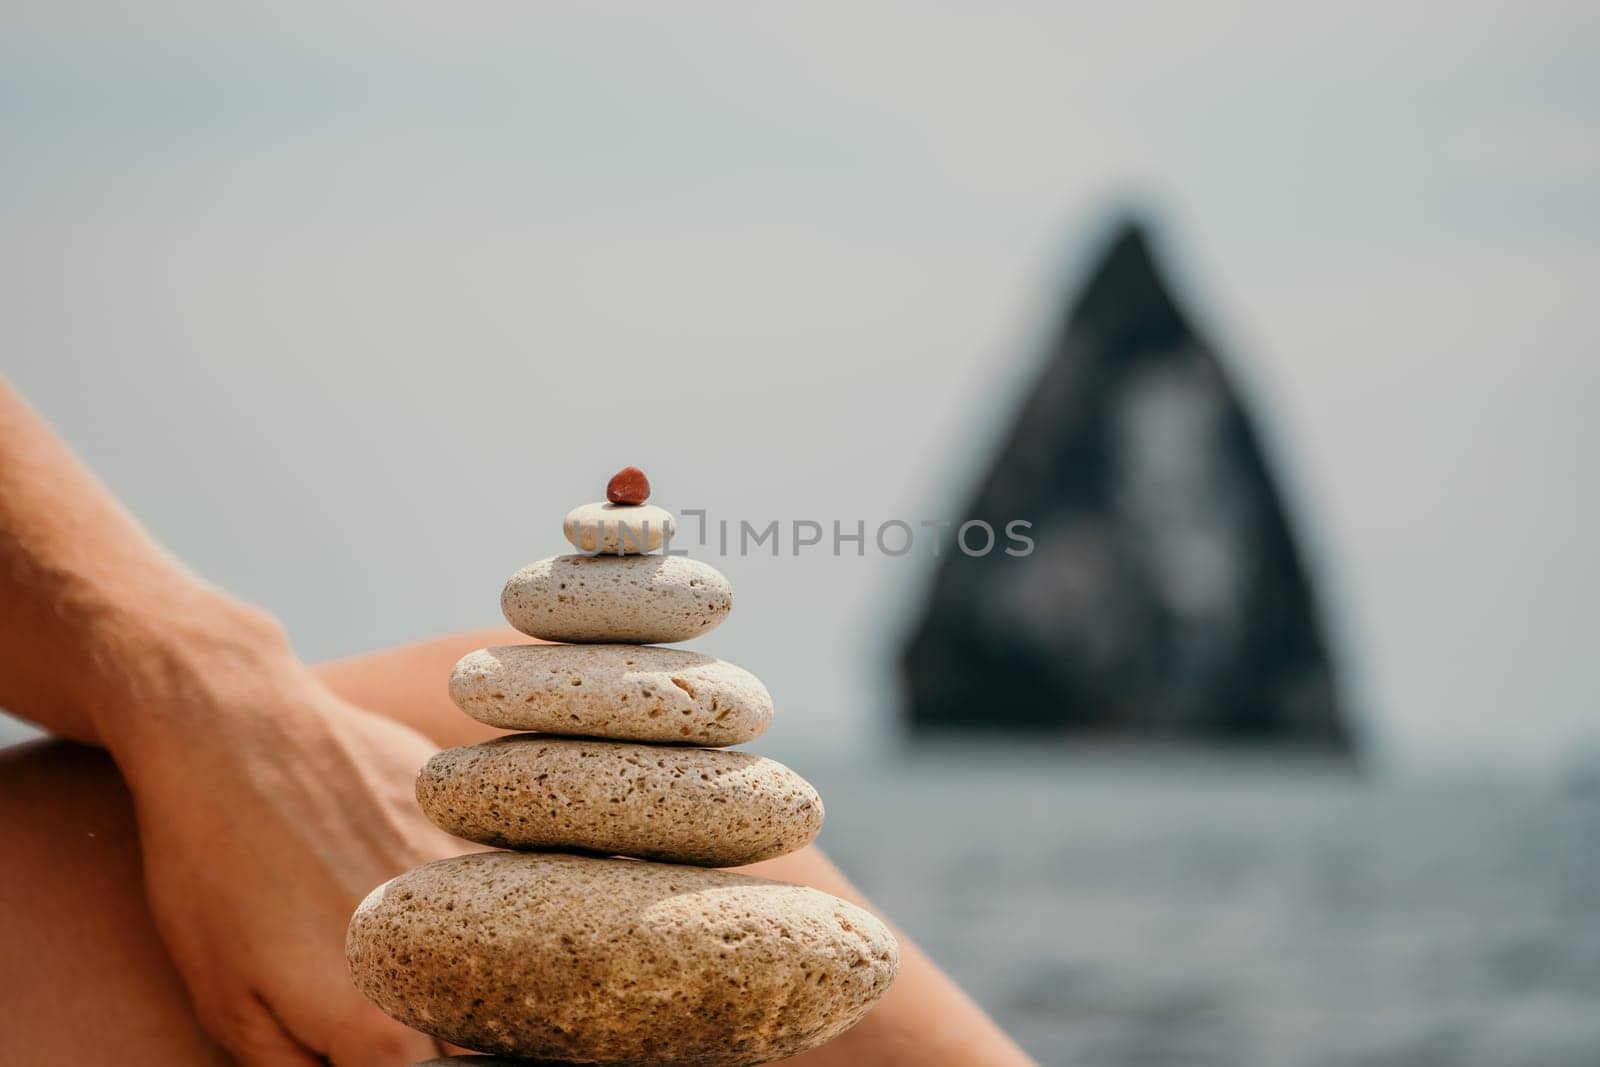 Woman bilds stones pyramid on the seashore on a sunny day on the blue sea background. Happy holidays. Pebble beach, calm sea, travel destination. Concept of happy vacation on the sea, meditation, spa